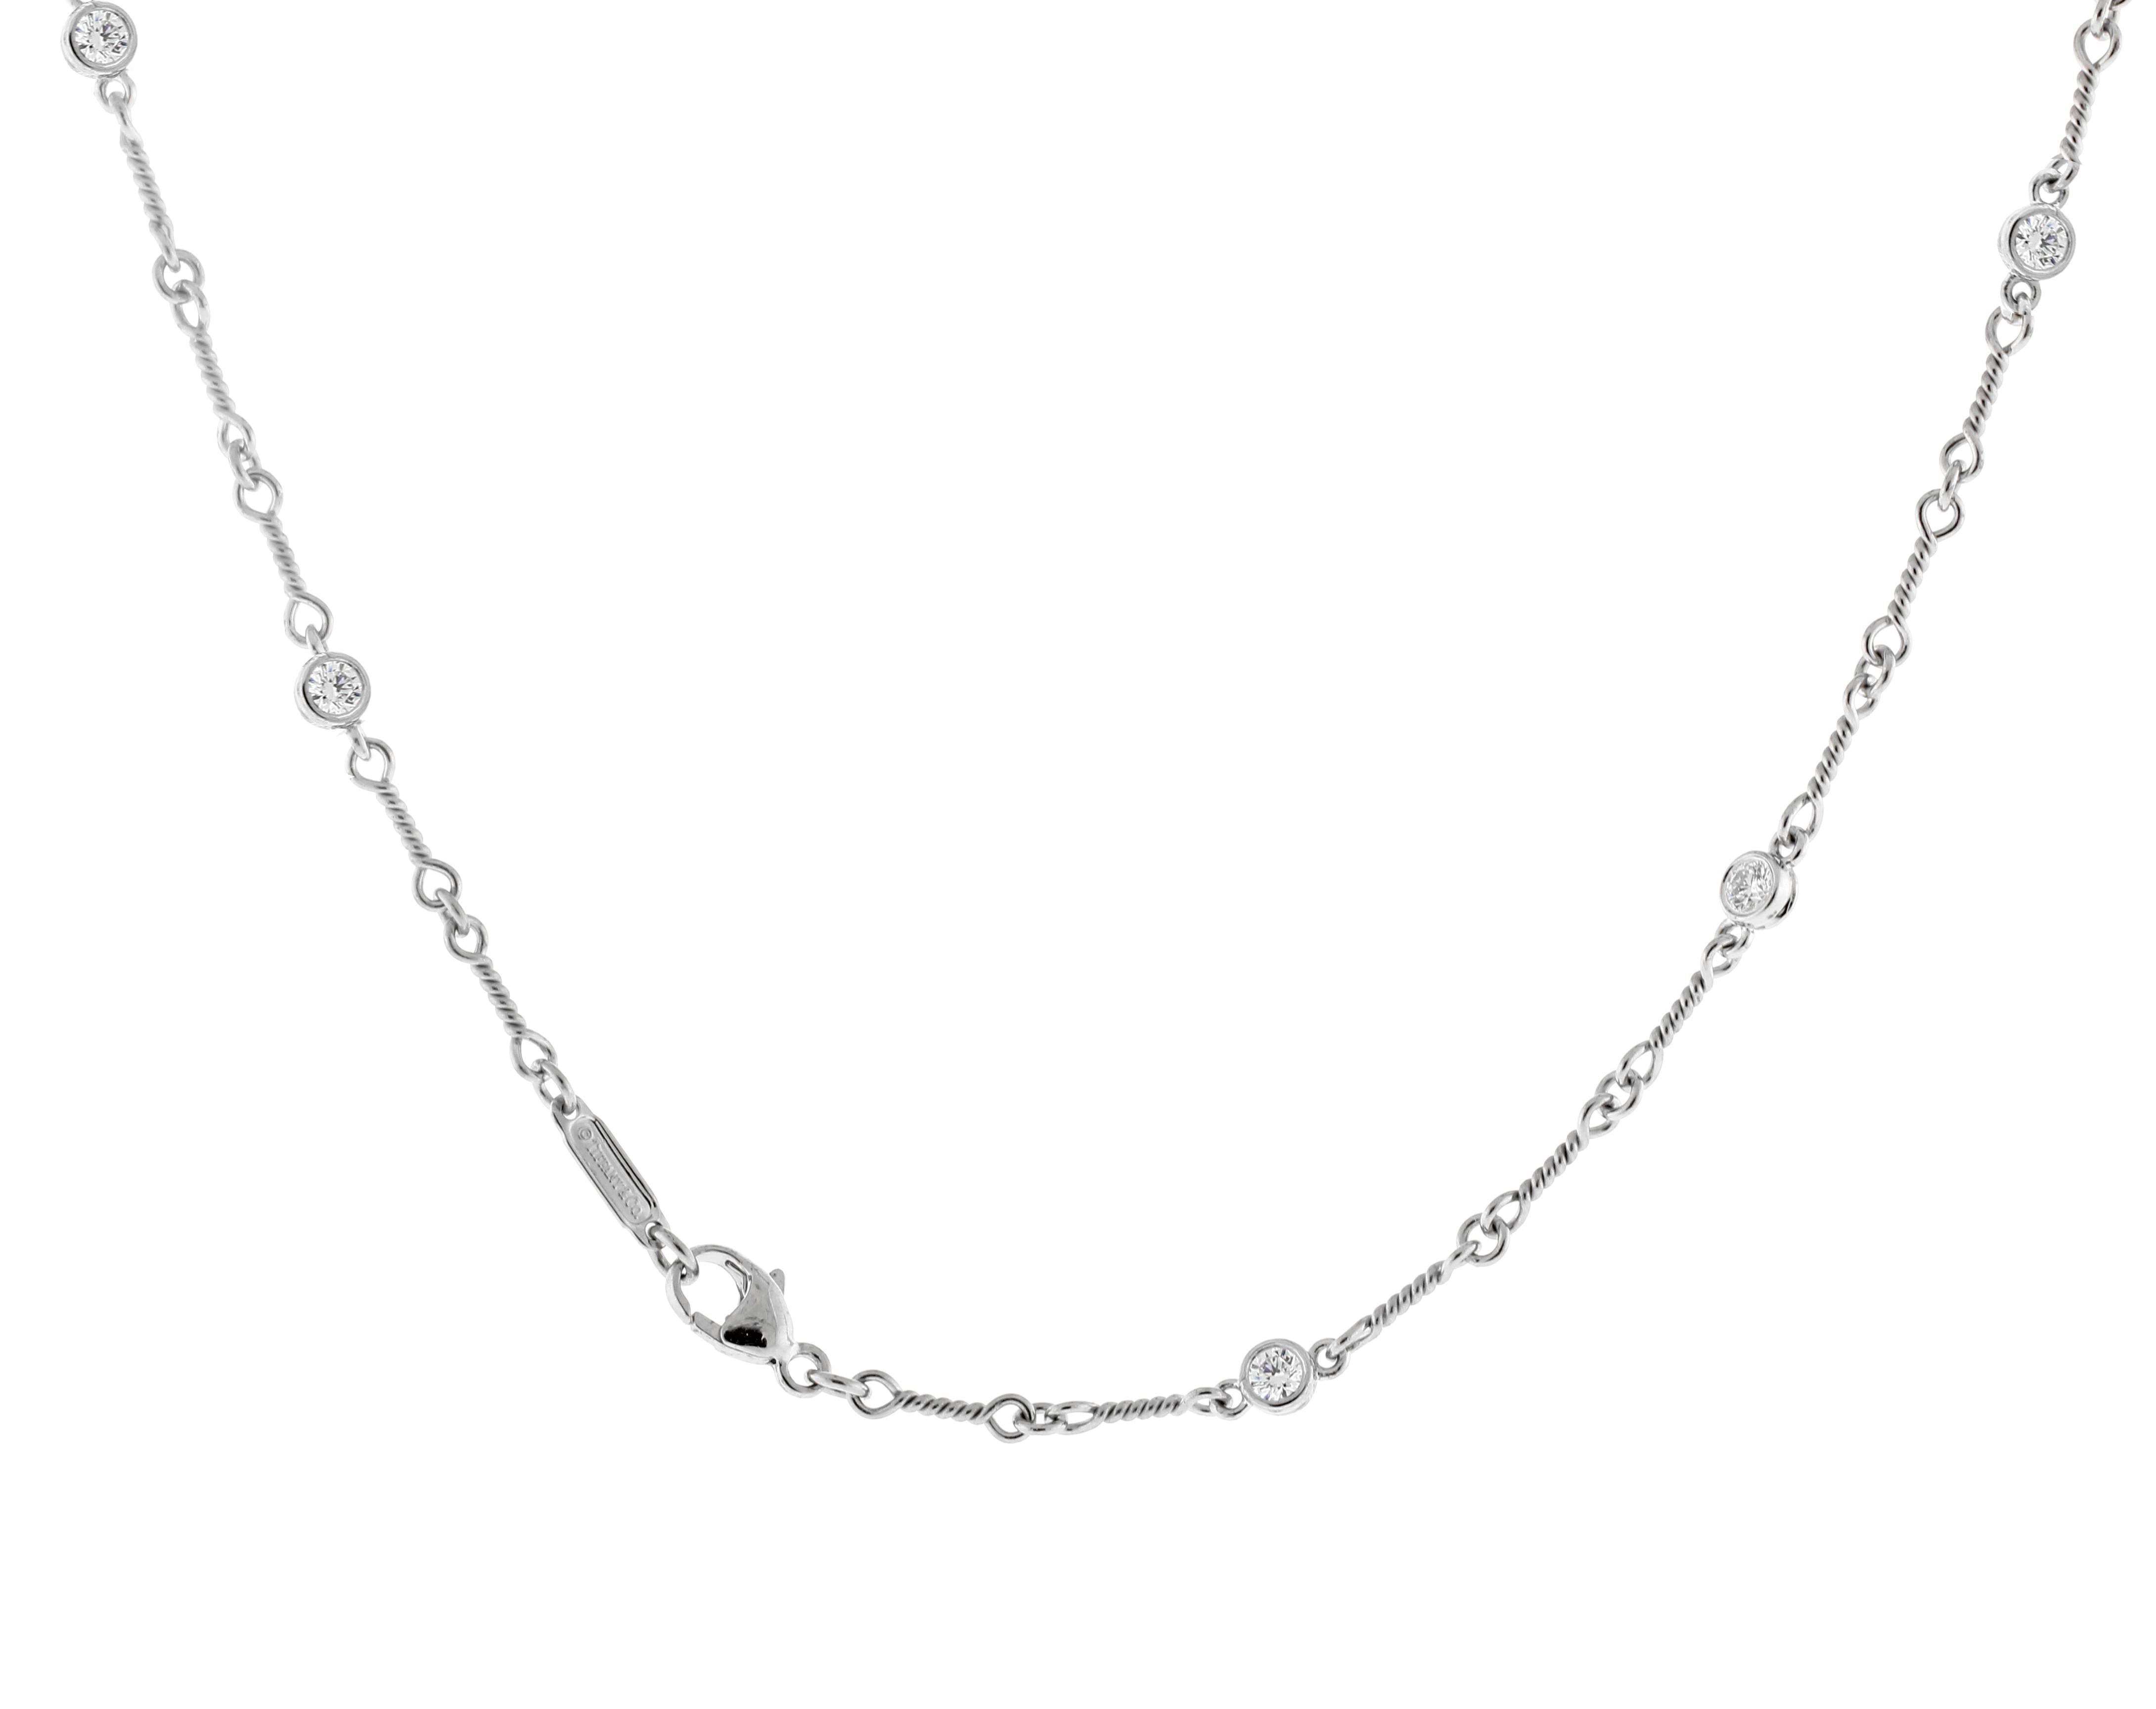 From Tiffany & Co. thier twisted bar necklave with .75 carats of diamonds
♦ Designer: Tiffany % Co.
♦ Metal: Platinum
♦ Circa 21st Century
♦  16 inches
♦  12 Diamonds= .75 Carats, F-G Color, VVS
♦  Packaging: Tiffany folder
♦  Condition: Excellent ,